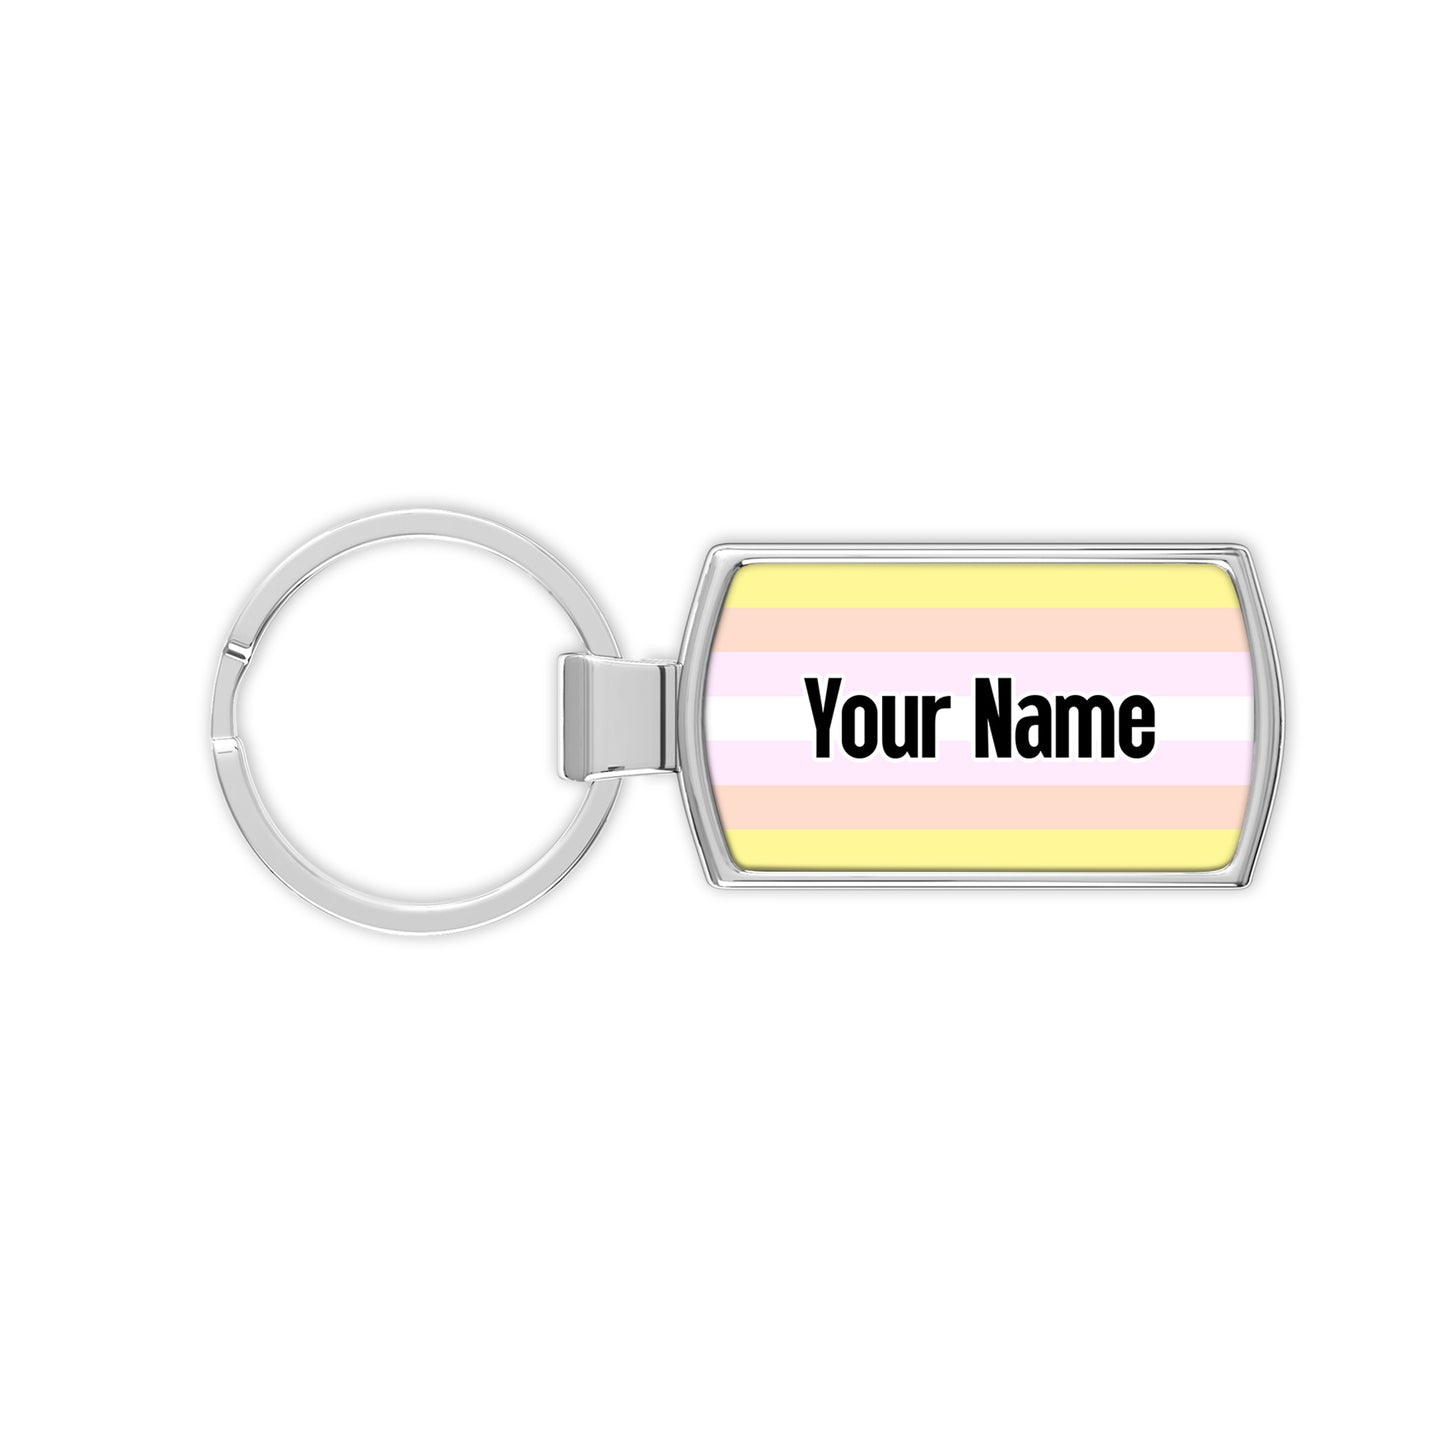 Pangender pride flag metal keyring that comes personalised with your name